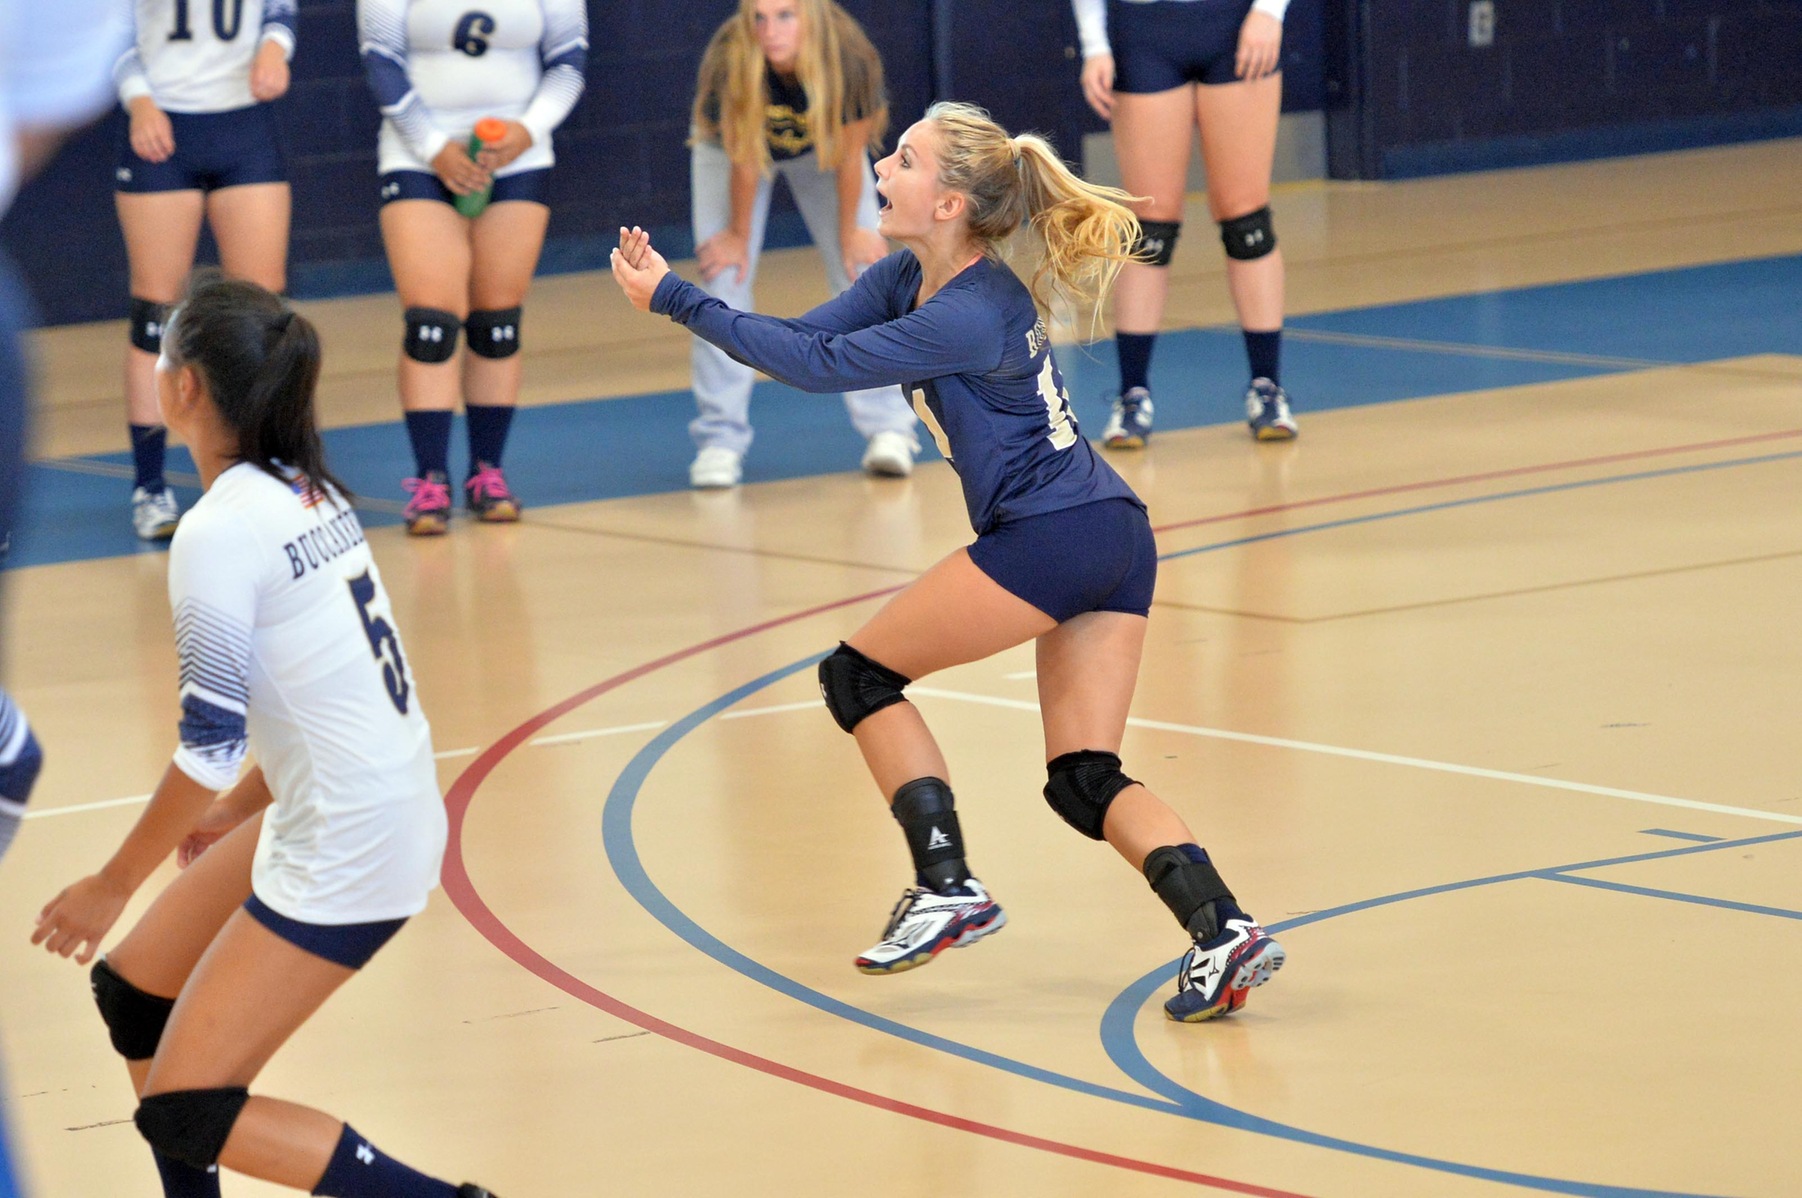 Ruggeri Makes Maritime History with 1,000 Digs